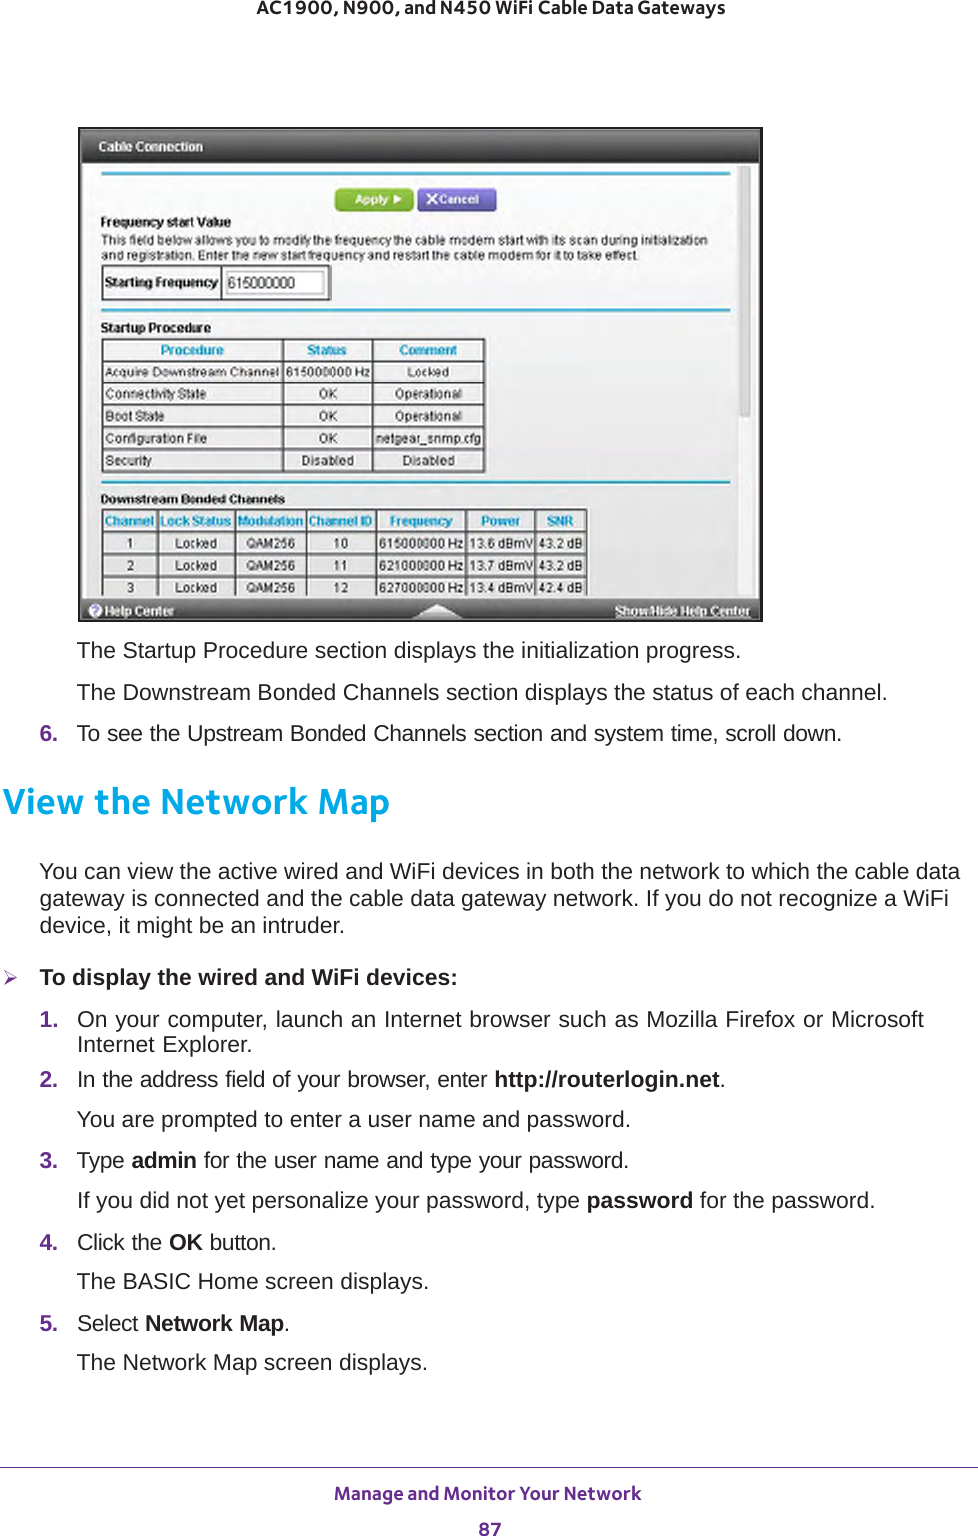 Manage and Monitor Your Network 87 AC1900, N900, and N450 WiFi Cable Data GatewaysThe Startup Procedure section displays the initialization progress.The Downstream Bonded Channels section displays the status of each channel.6.  To see the Upstream Bonded Channels section and system time, scroll down.View the Network MapYou can view the active wired and WiFi devices in both the network to which the cable data gateway is connected and the cable data gateway network. If you do not recognize a WiFi device, it might be an intruder.To display the wired and WiFi devices:1.  On your computer, launch an Internet browser such as Mozilla Firefox or Microsoft Internet Explorer. 2.  In the address field of your browser, enter http://routerlogin.net.You are prompted to enter a user name and password.3.  Type admin for the user name and type your password.If you did not yet personalize your password, type password for the password.4.  Click the OK button. The BASIC Home screen displays.5.  Select Network Map.The Network Map screen displays.